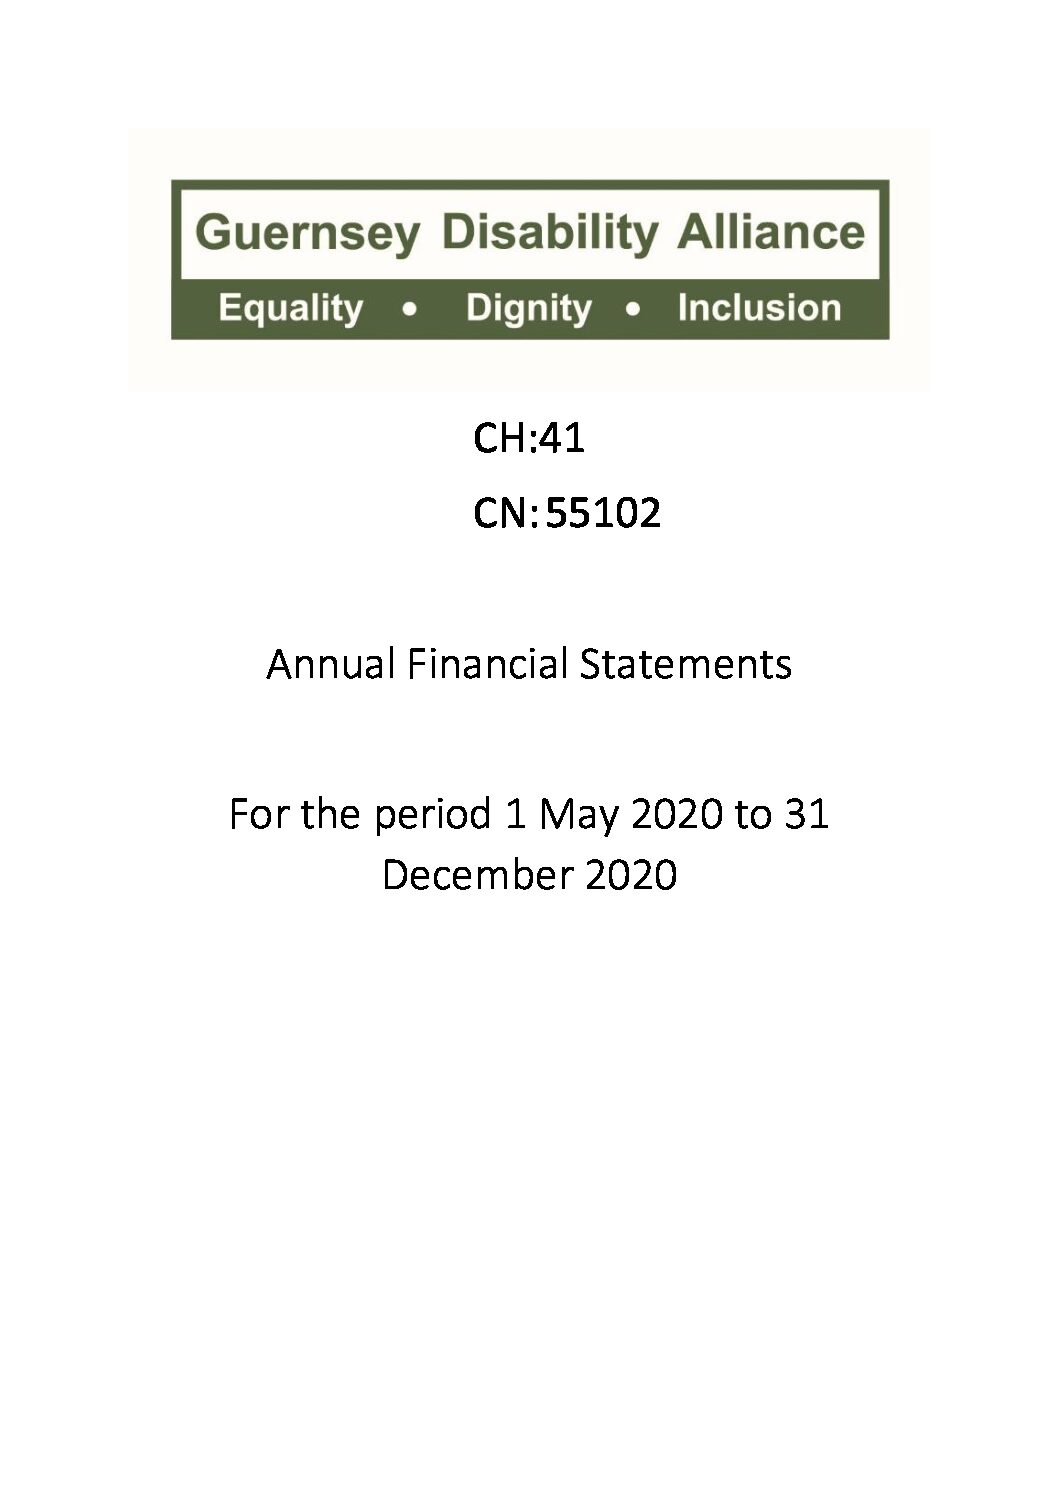 GDA Financial Statements from 1 May 2020 to 31st December 2020. Click image to open.